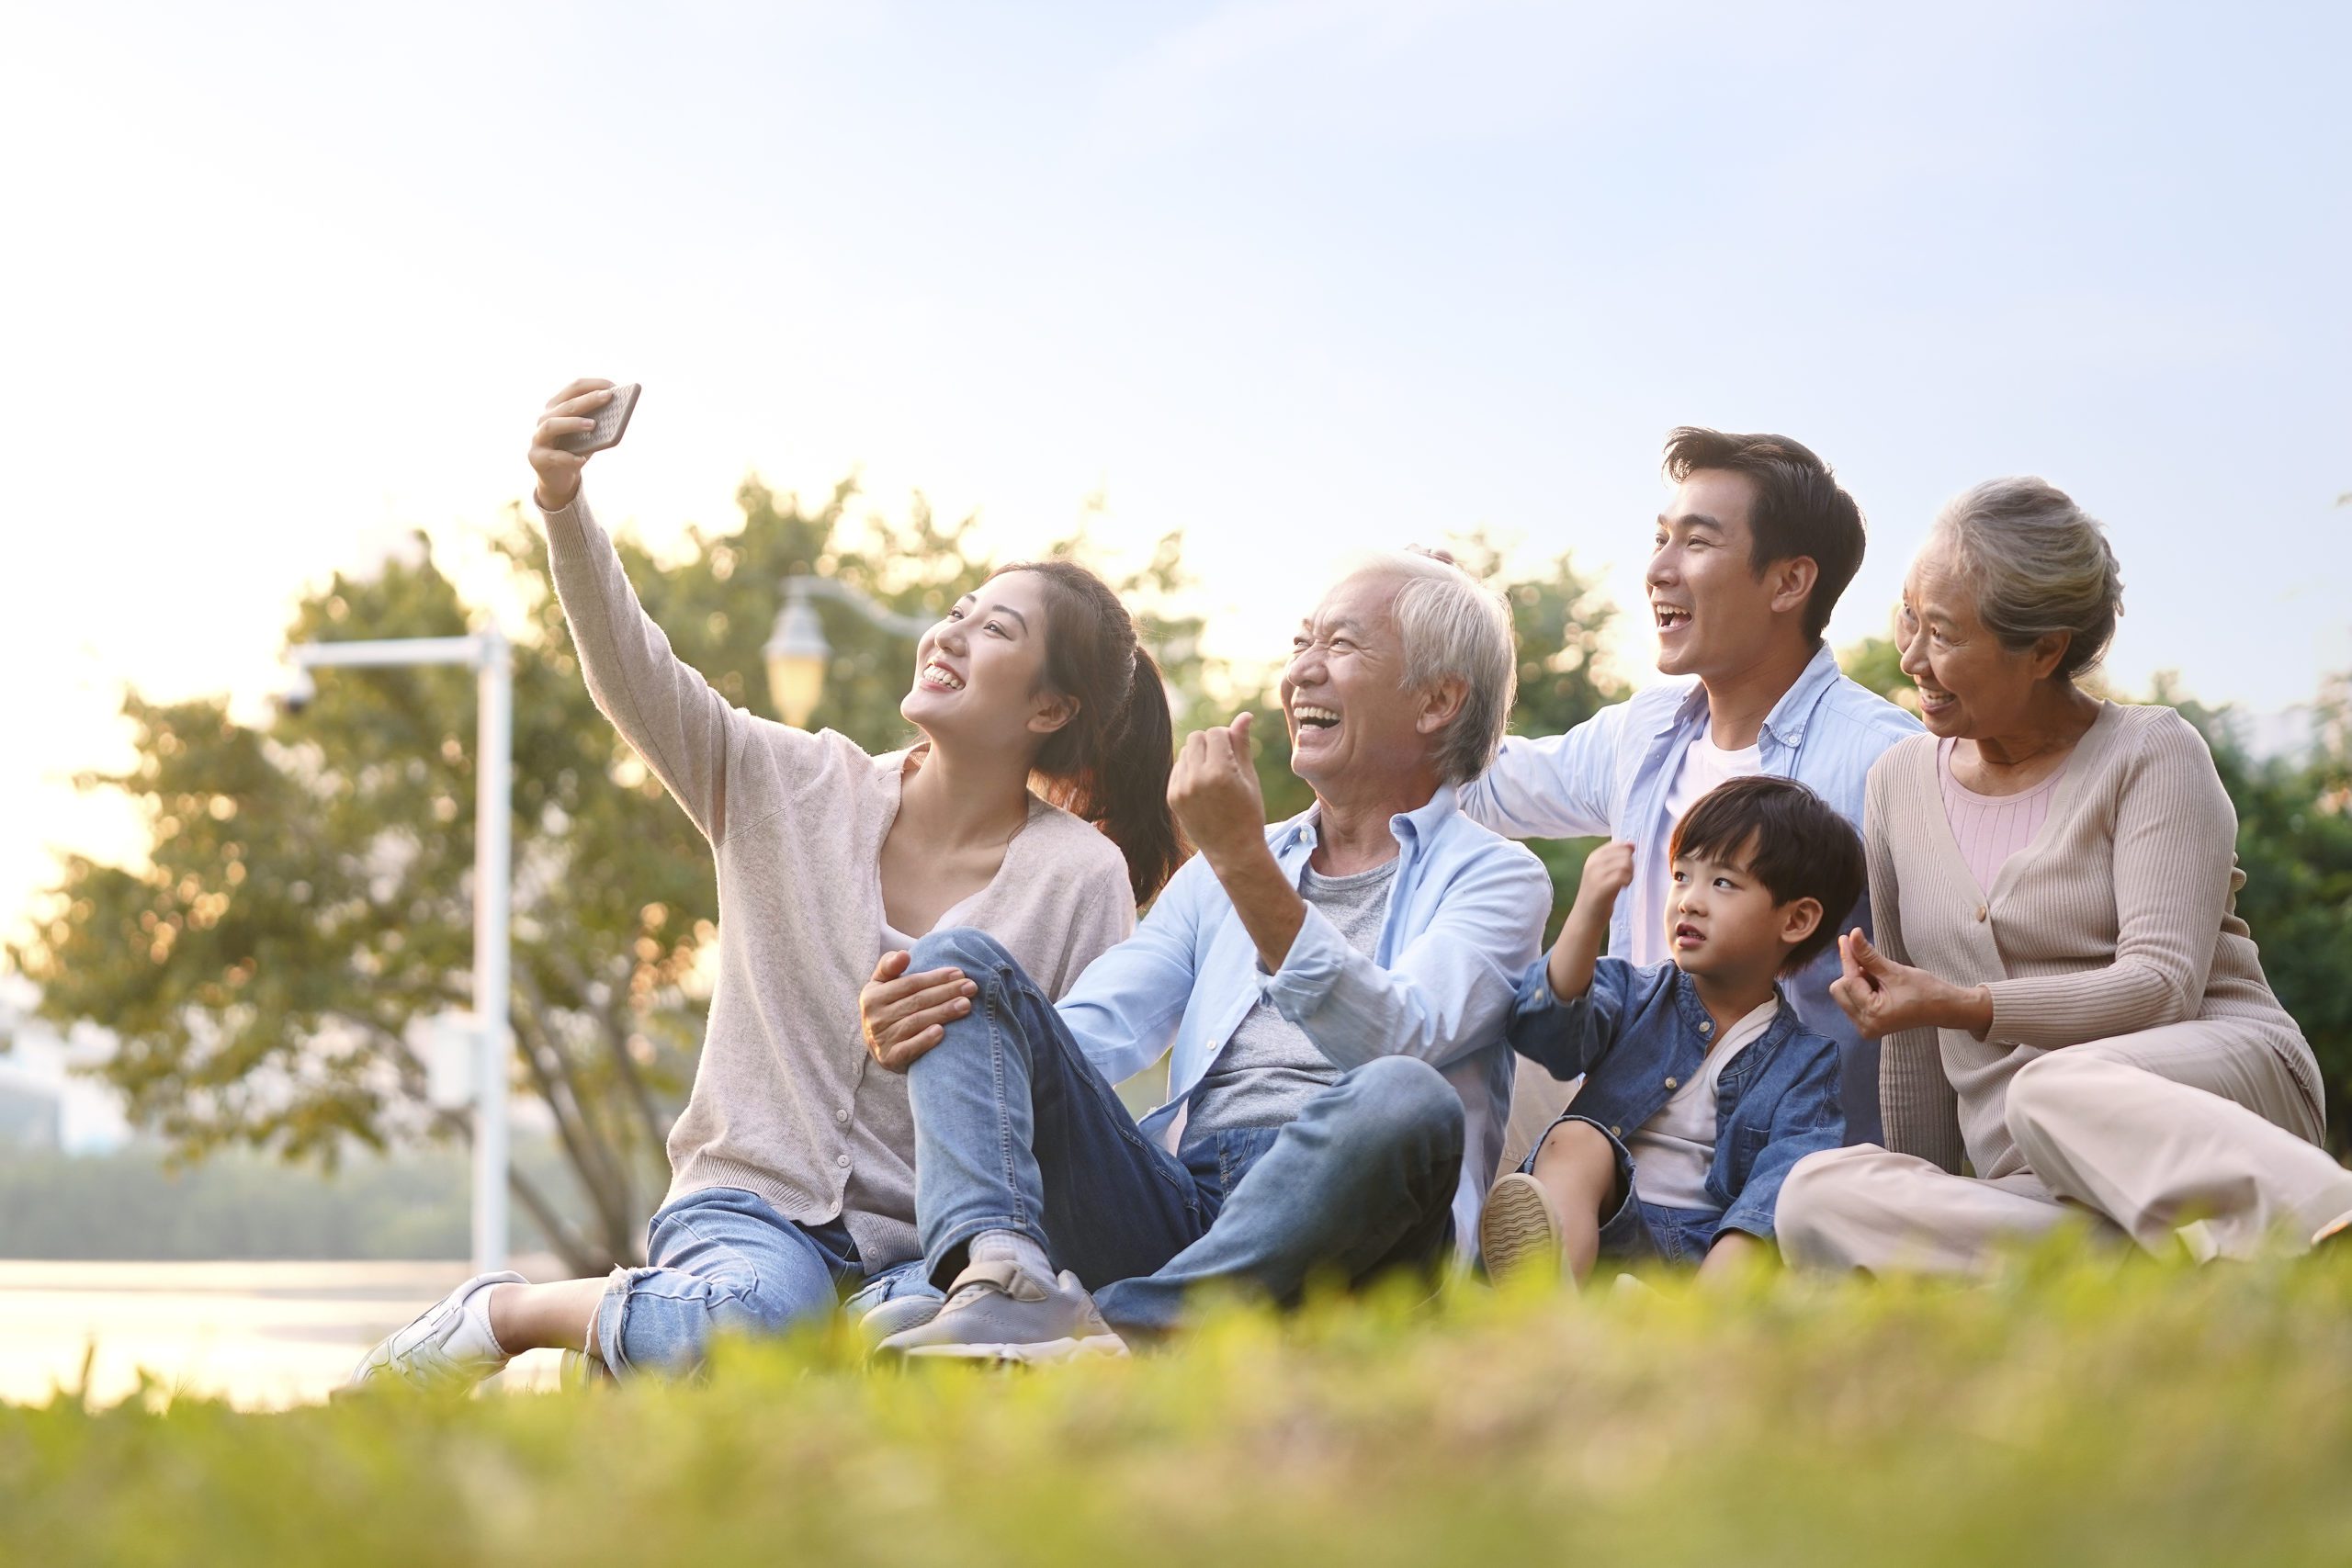 Grandparents with grandkids / heir(s) taking a selfie outside